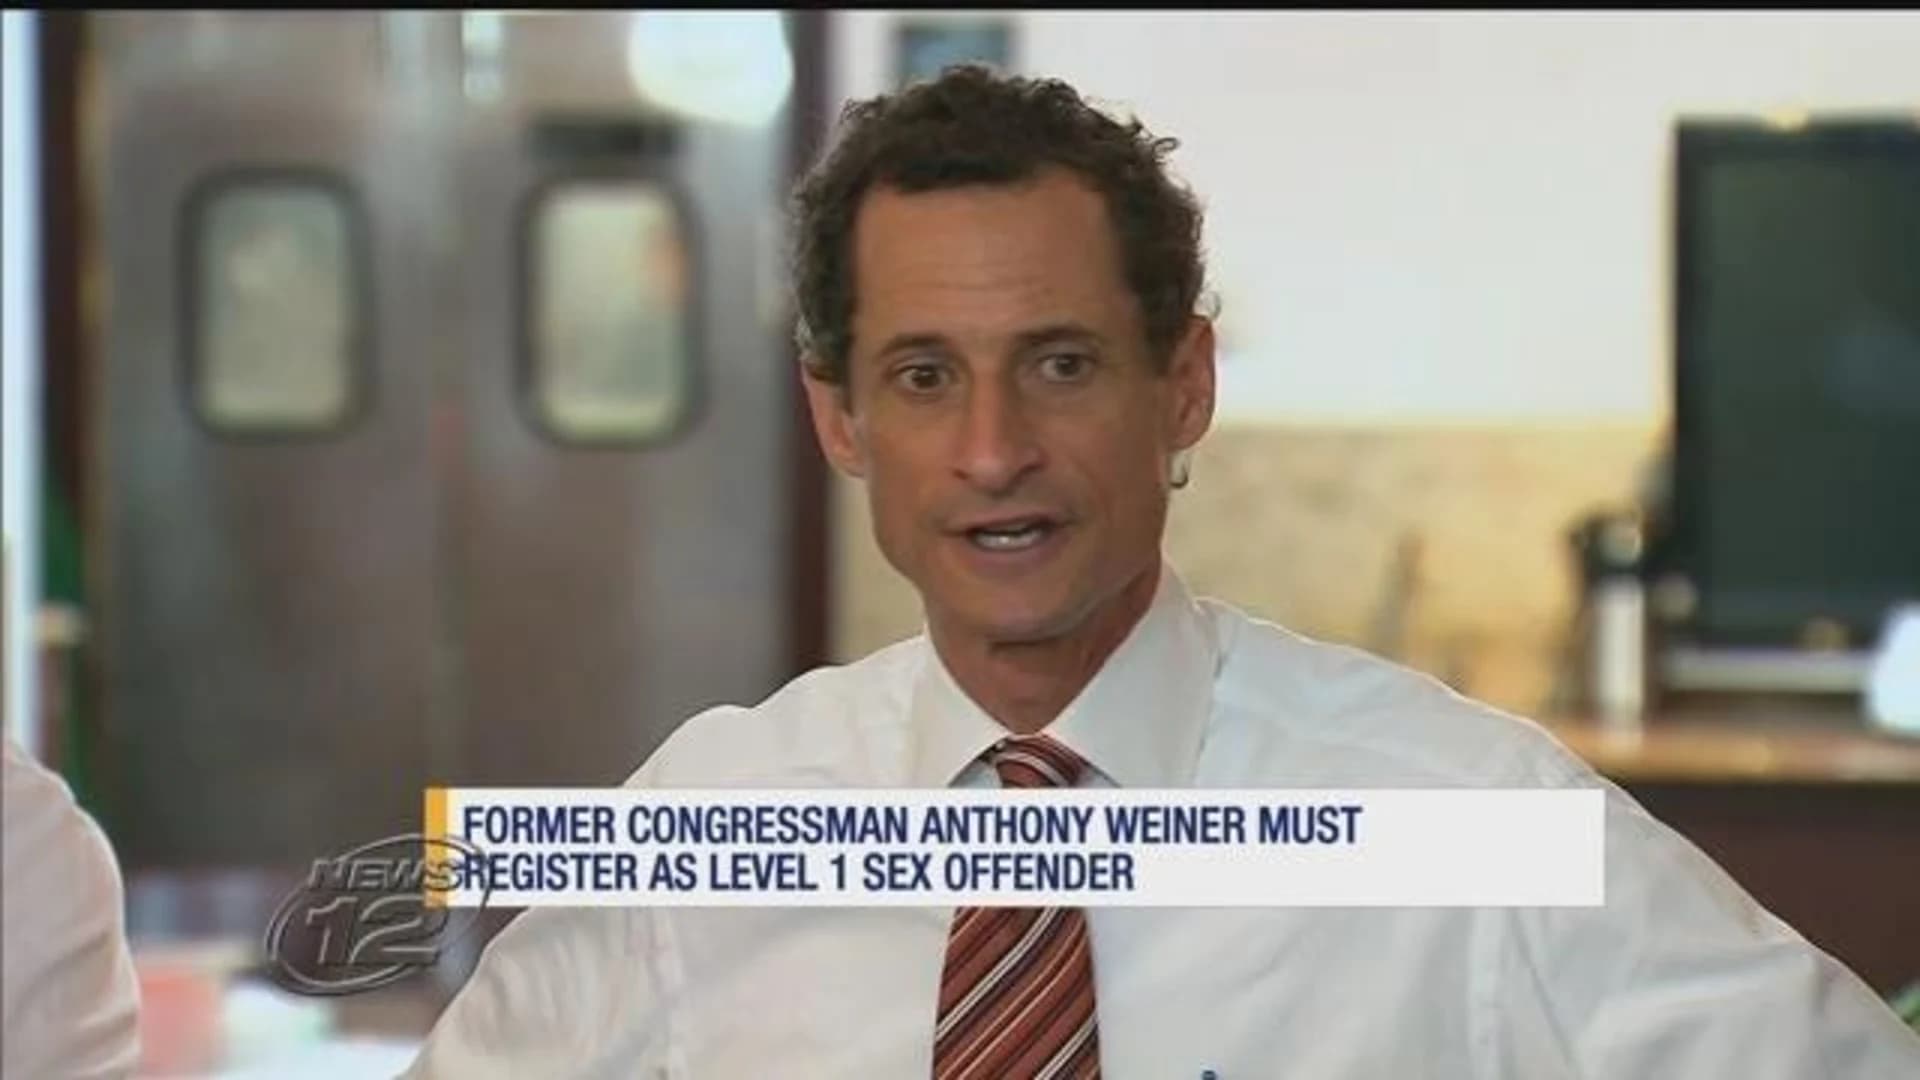 Ex-Rep. Anthony Weiner ordered to register as sex offender